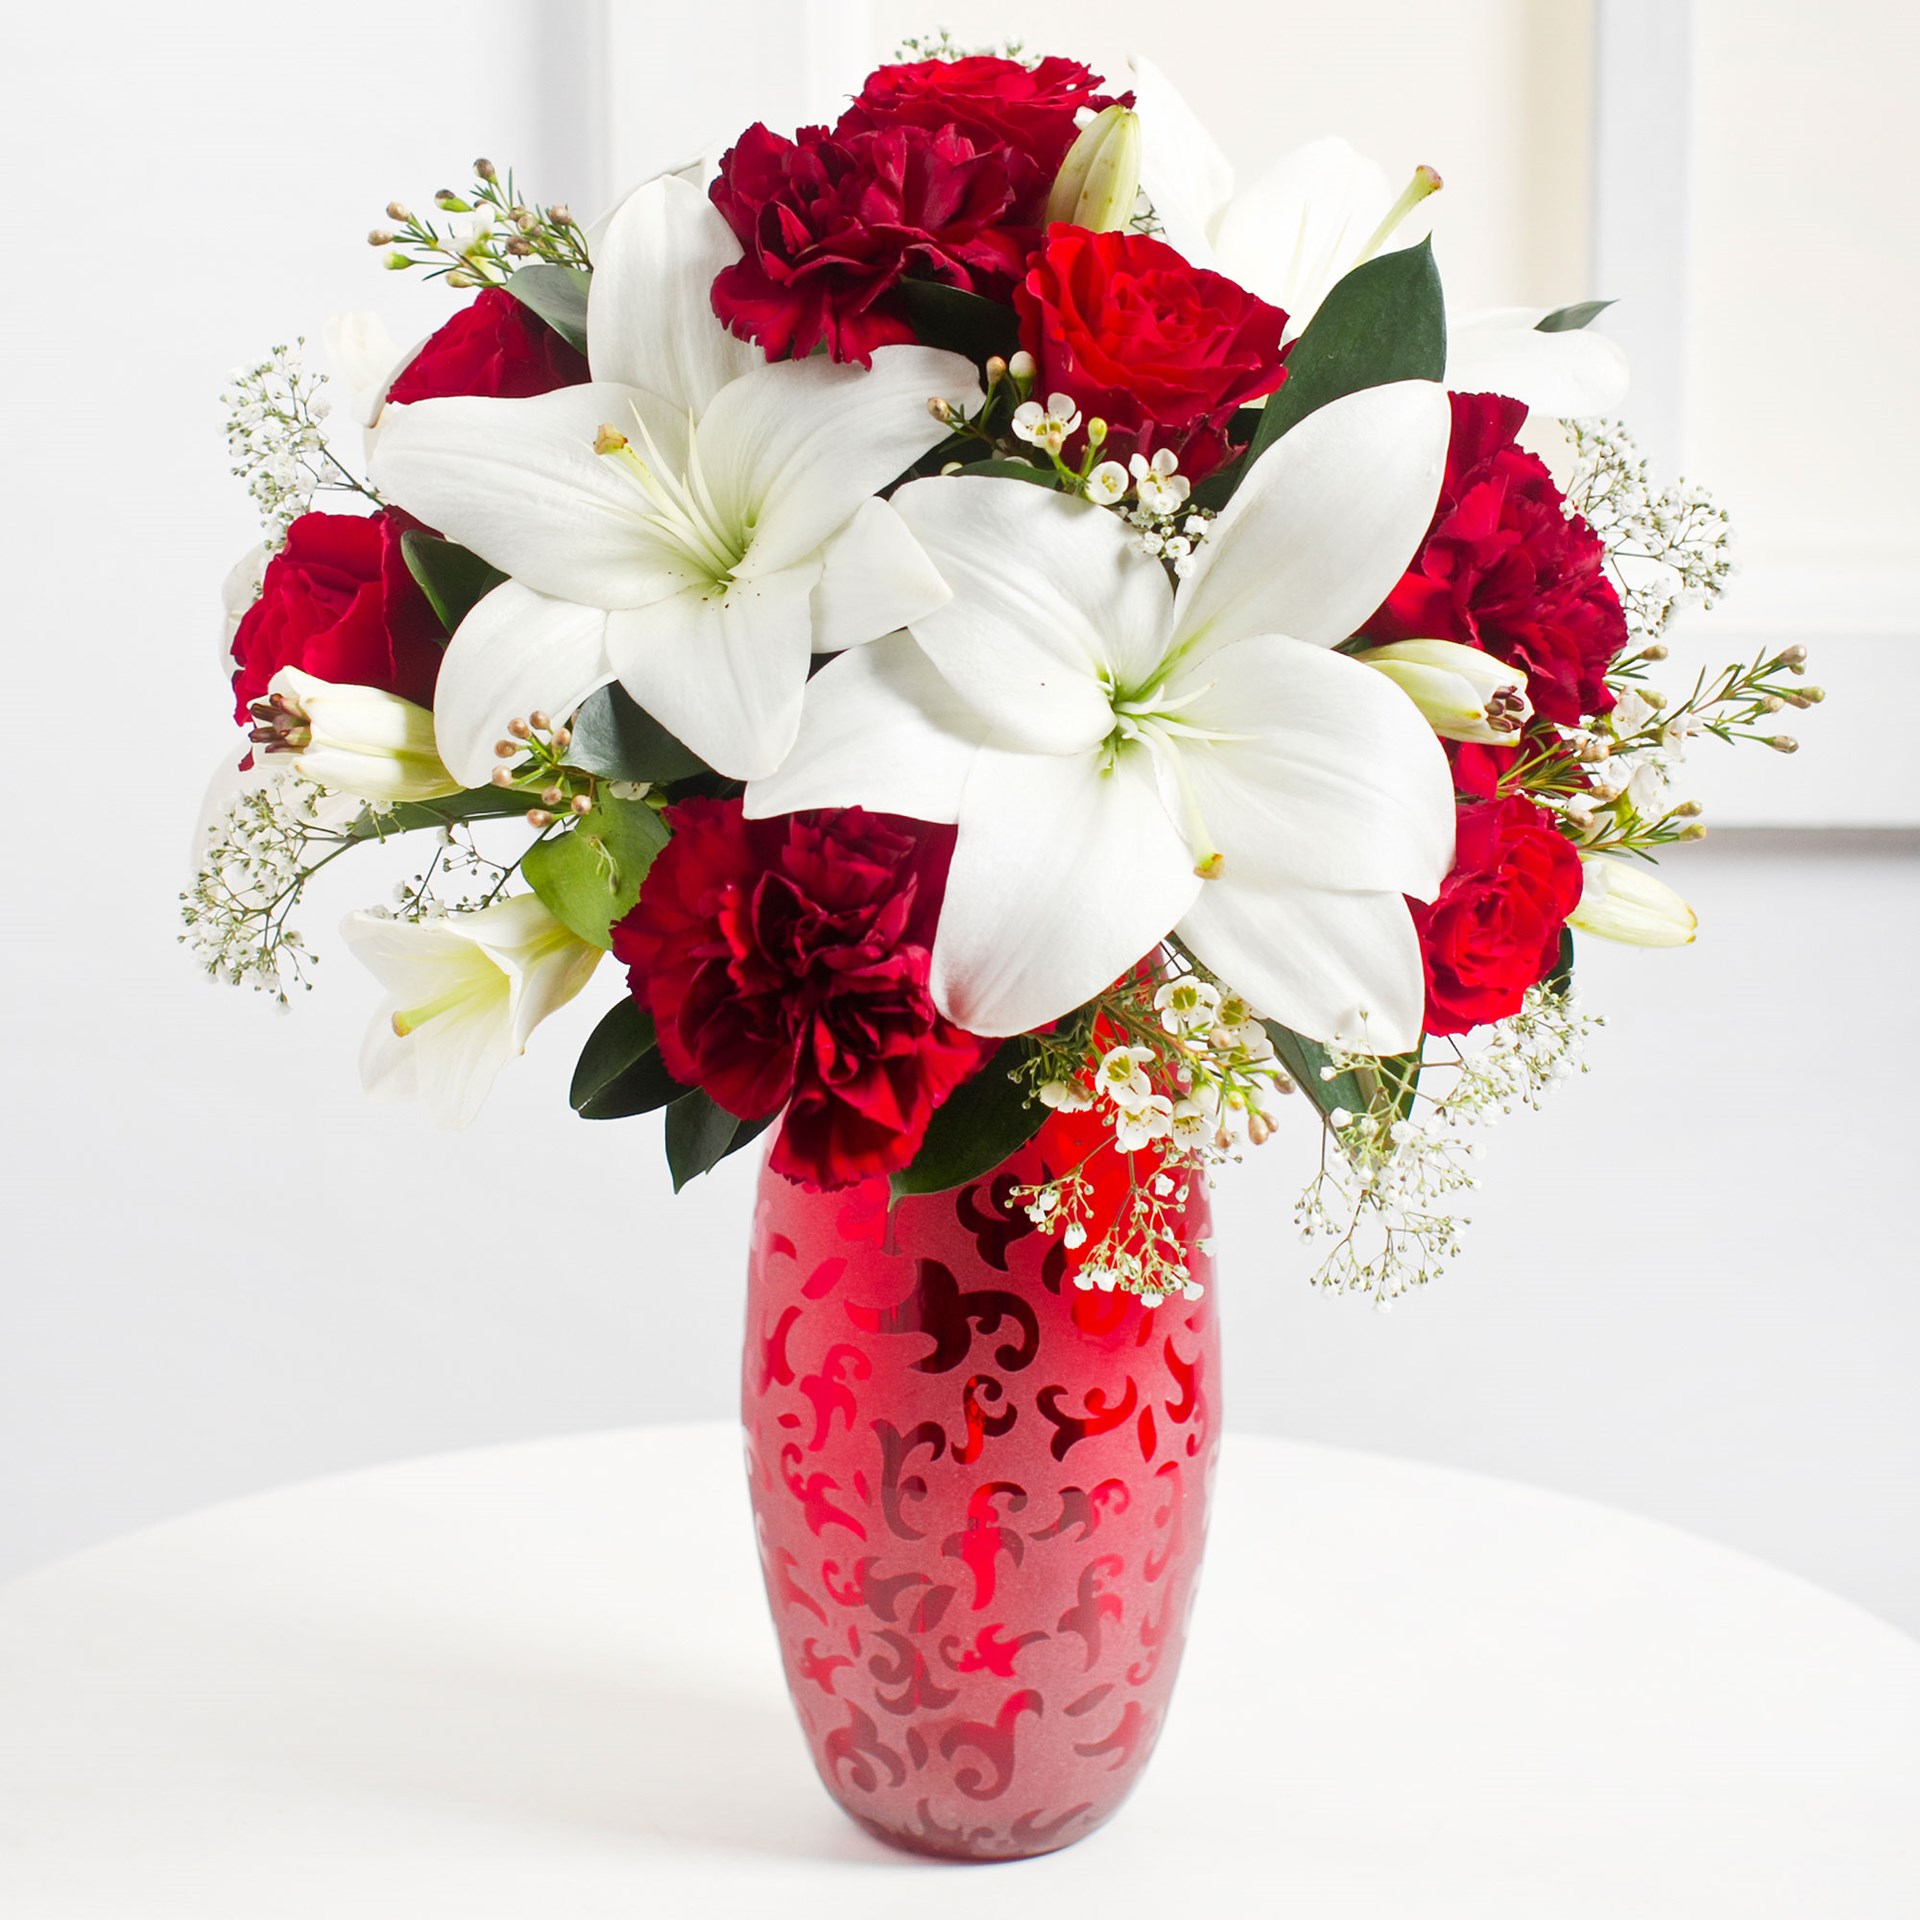 product image for Romantic Bouquet in Red and White Colours